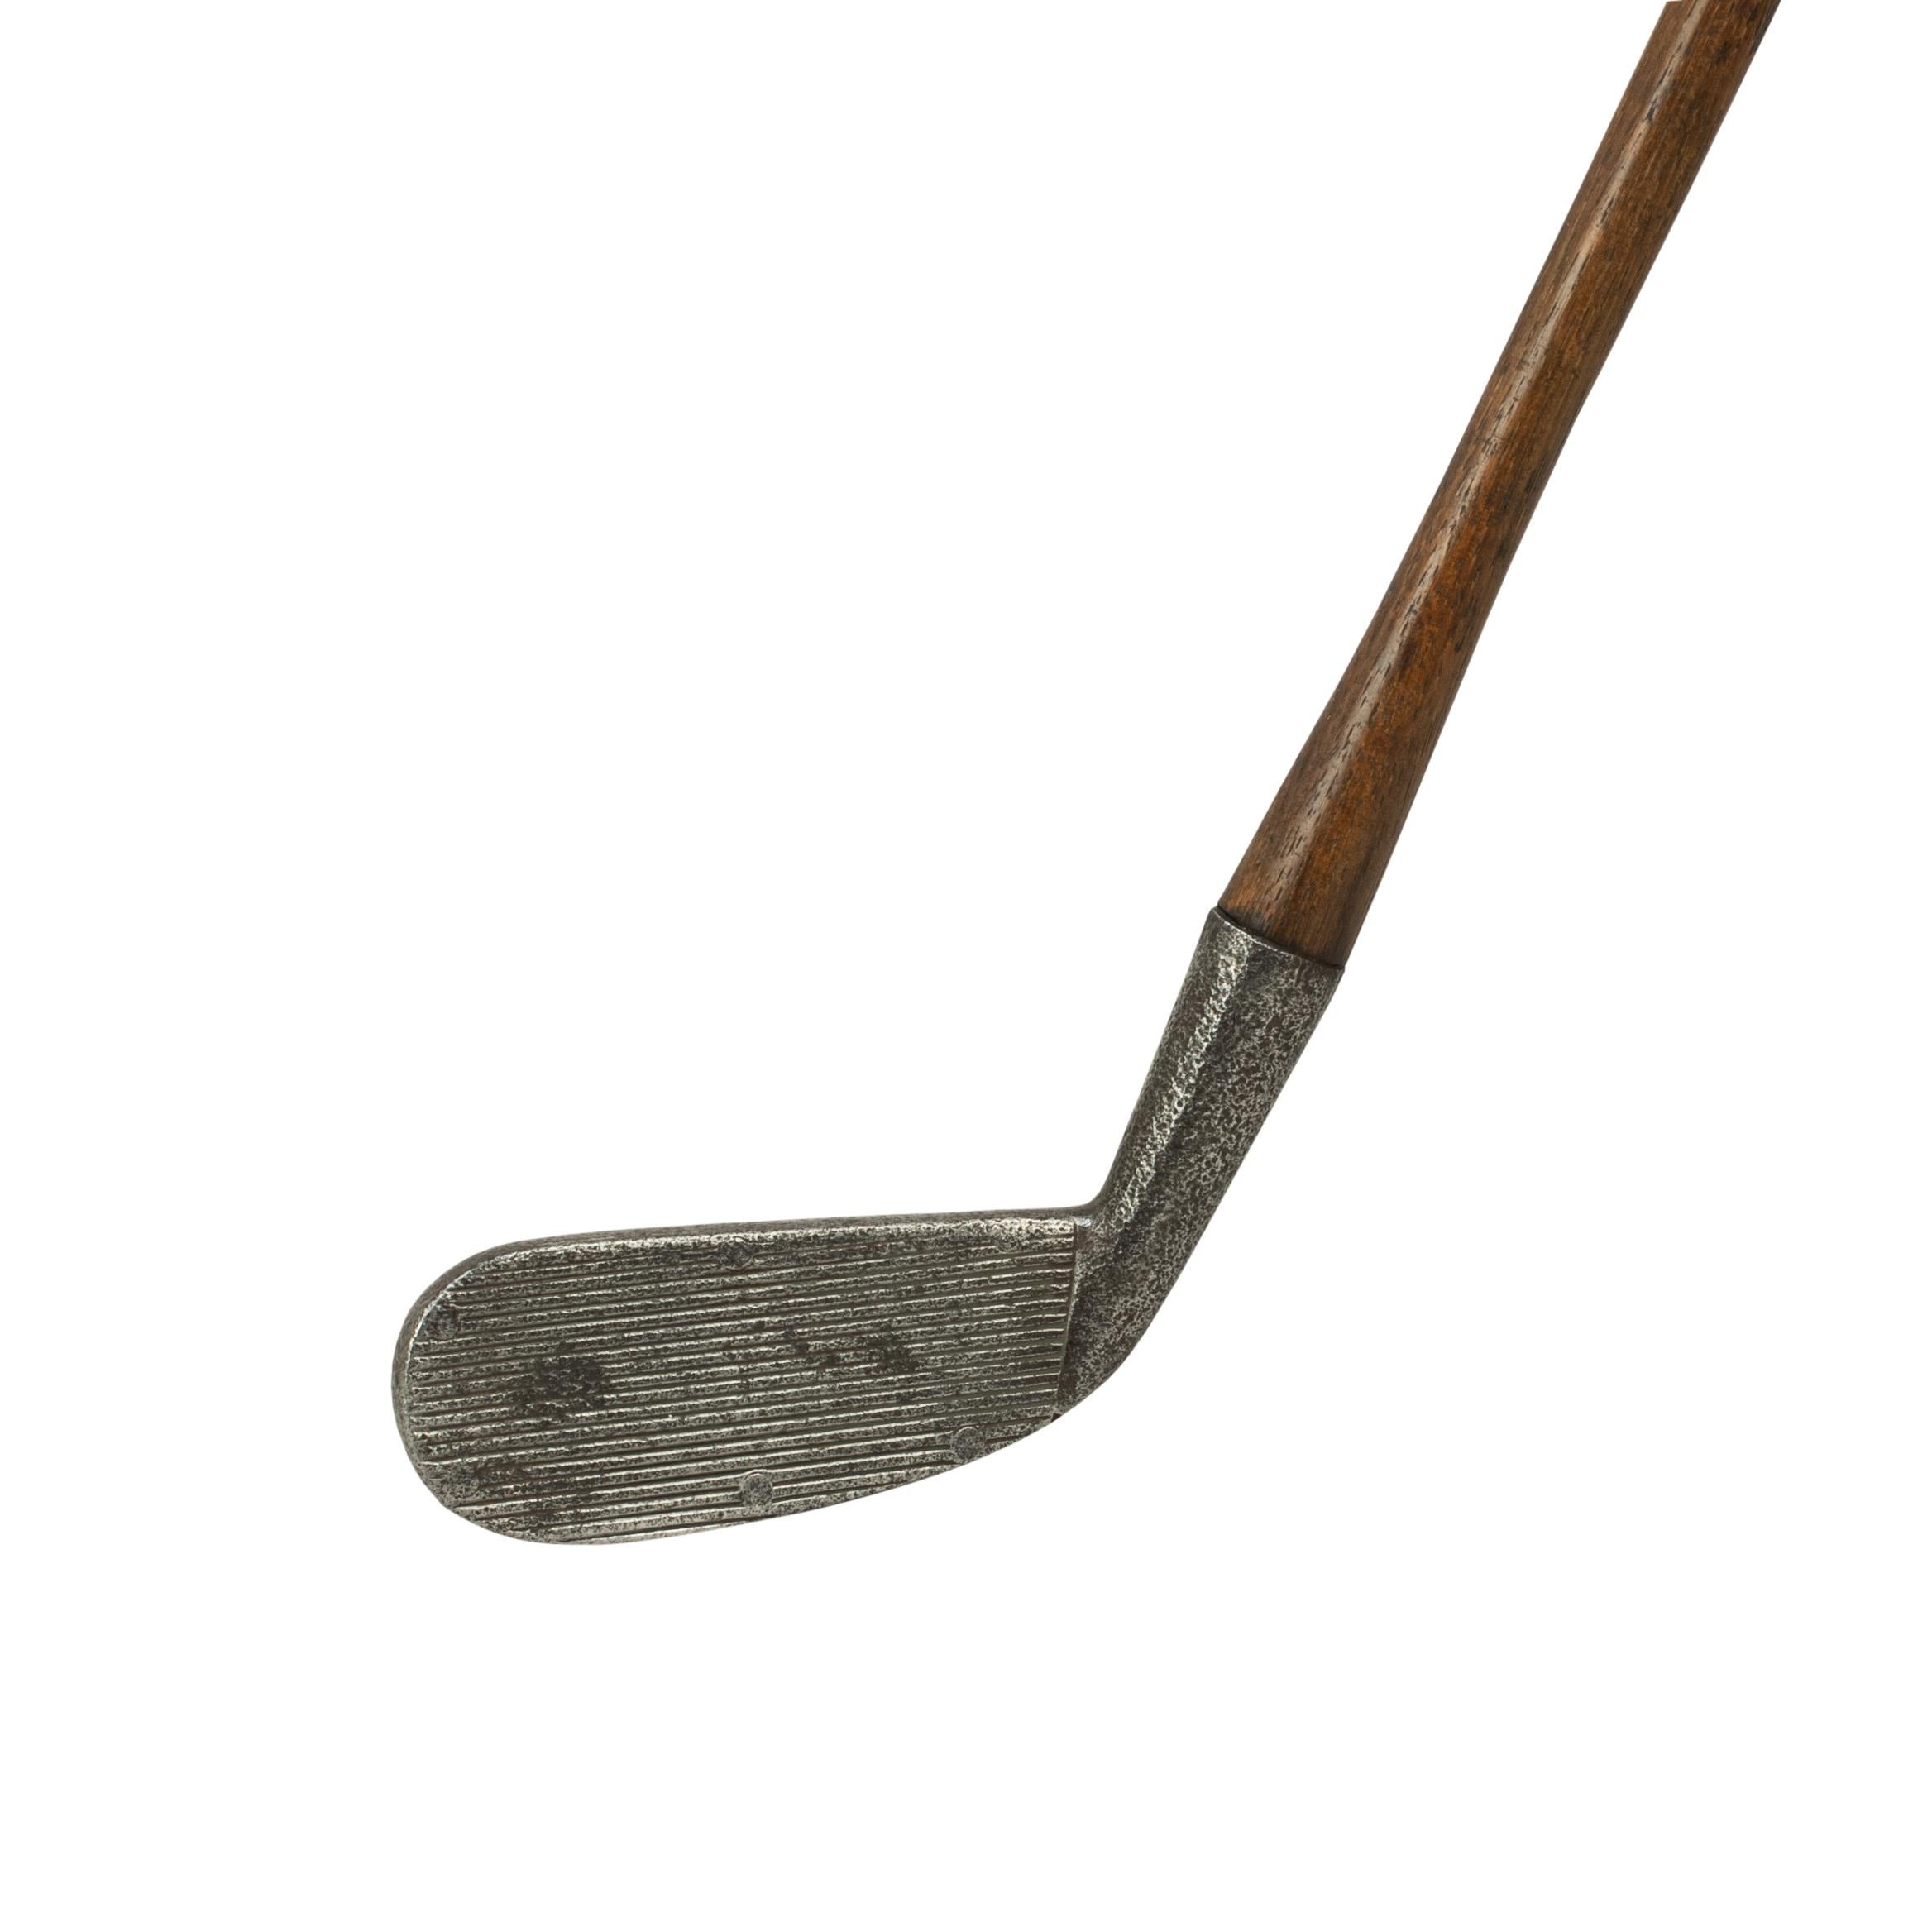 A.G. Spalding & Bros. spring faced golf club iron, cleek.
A rare spring face cleek golf club with hickory shaft with a brittle rubber grip. The club is based on the principle of the 'Cran cleek', but instead of a wood face insert Spadling uses a